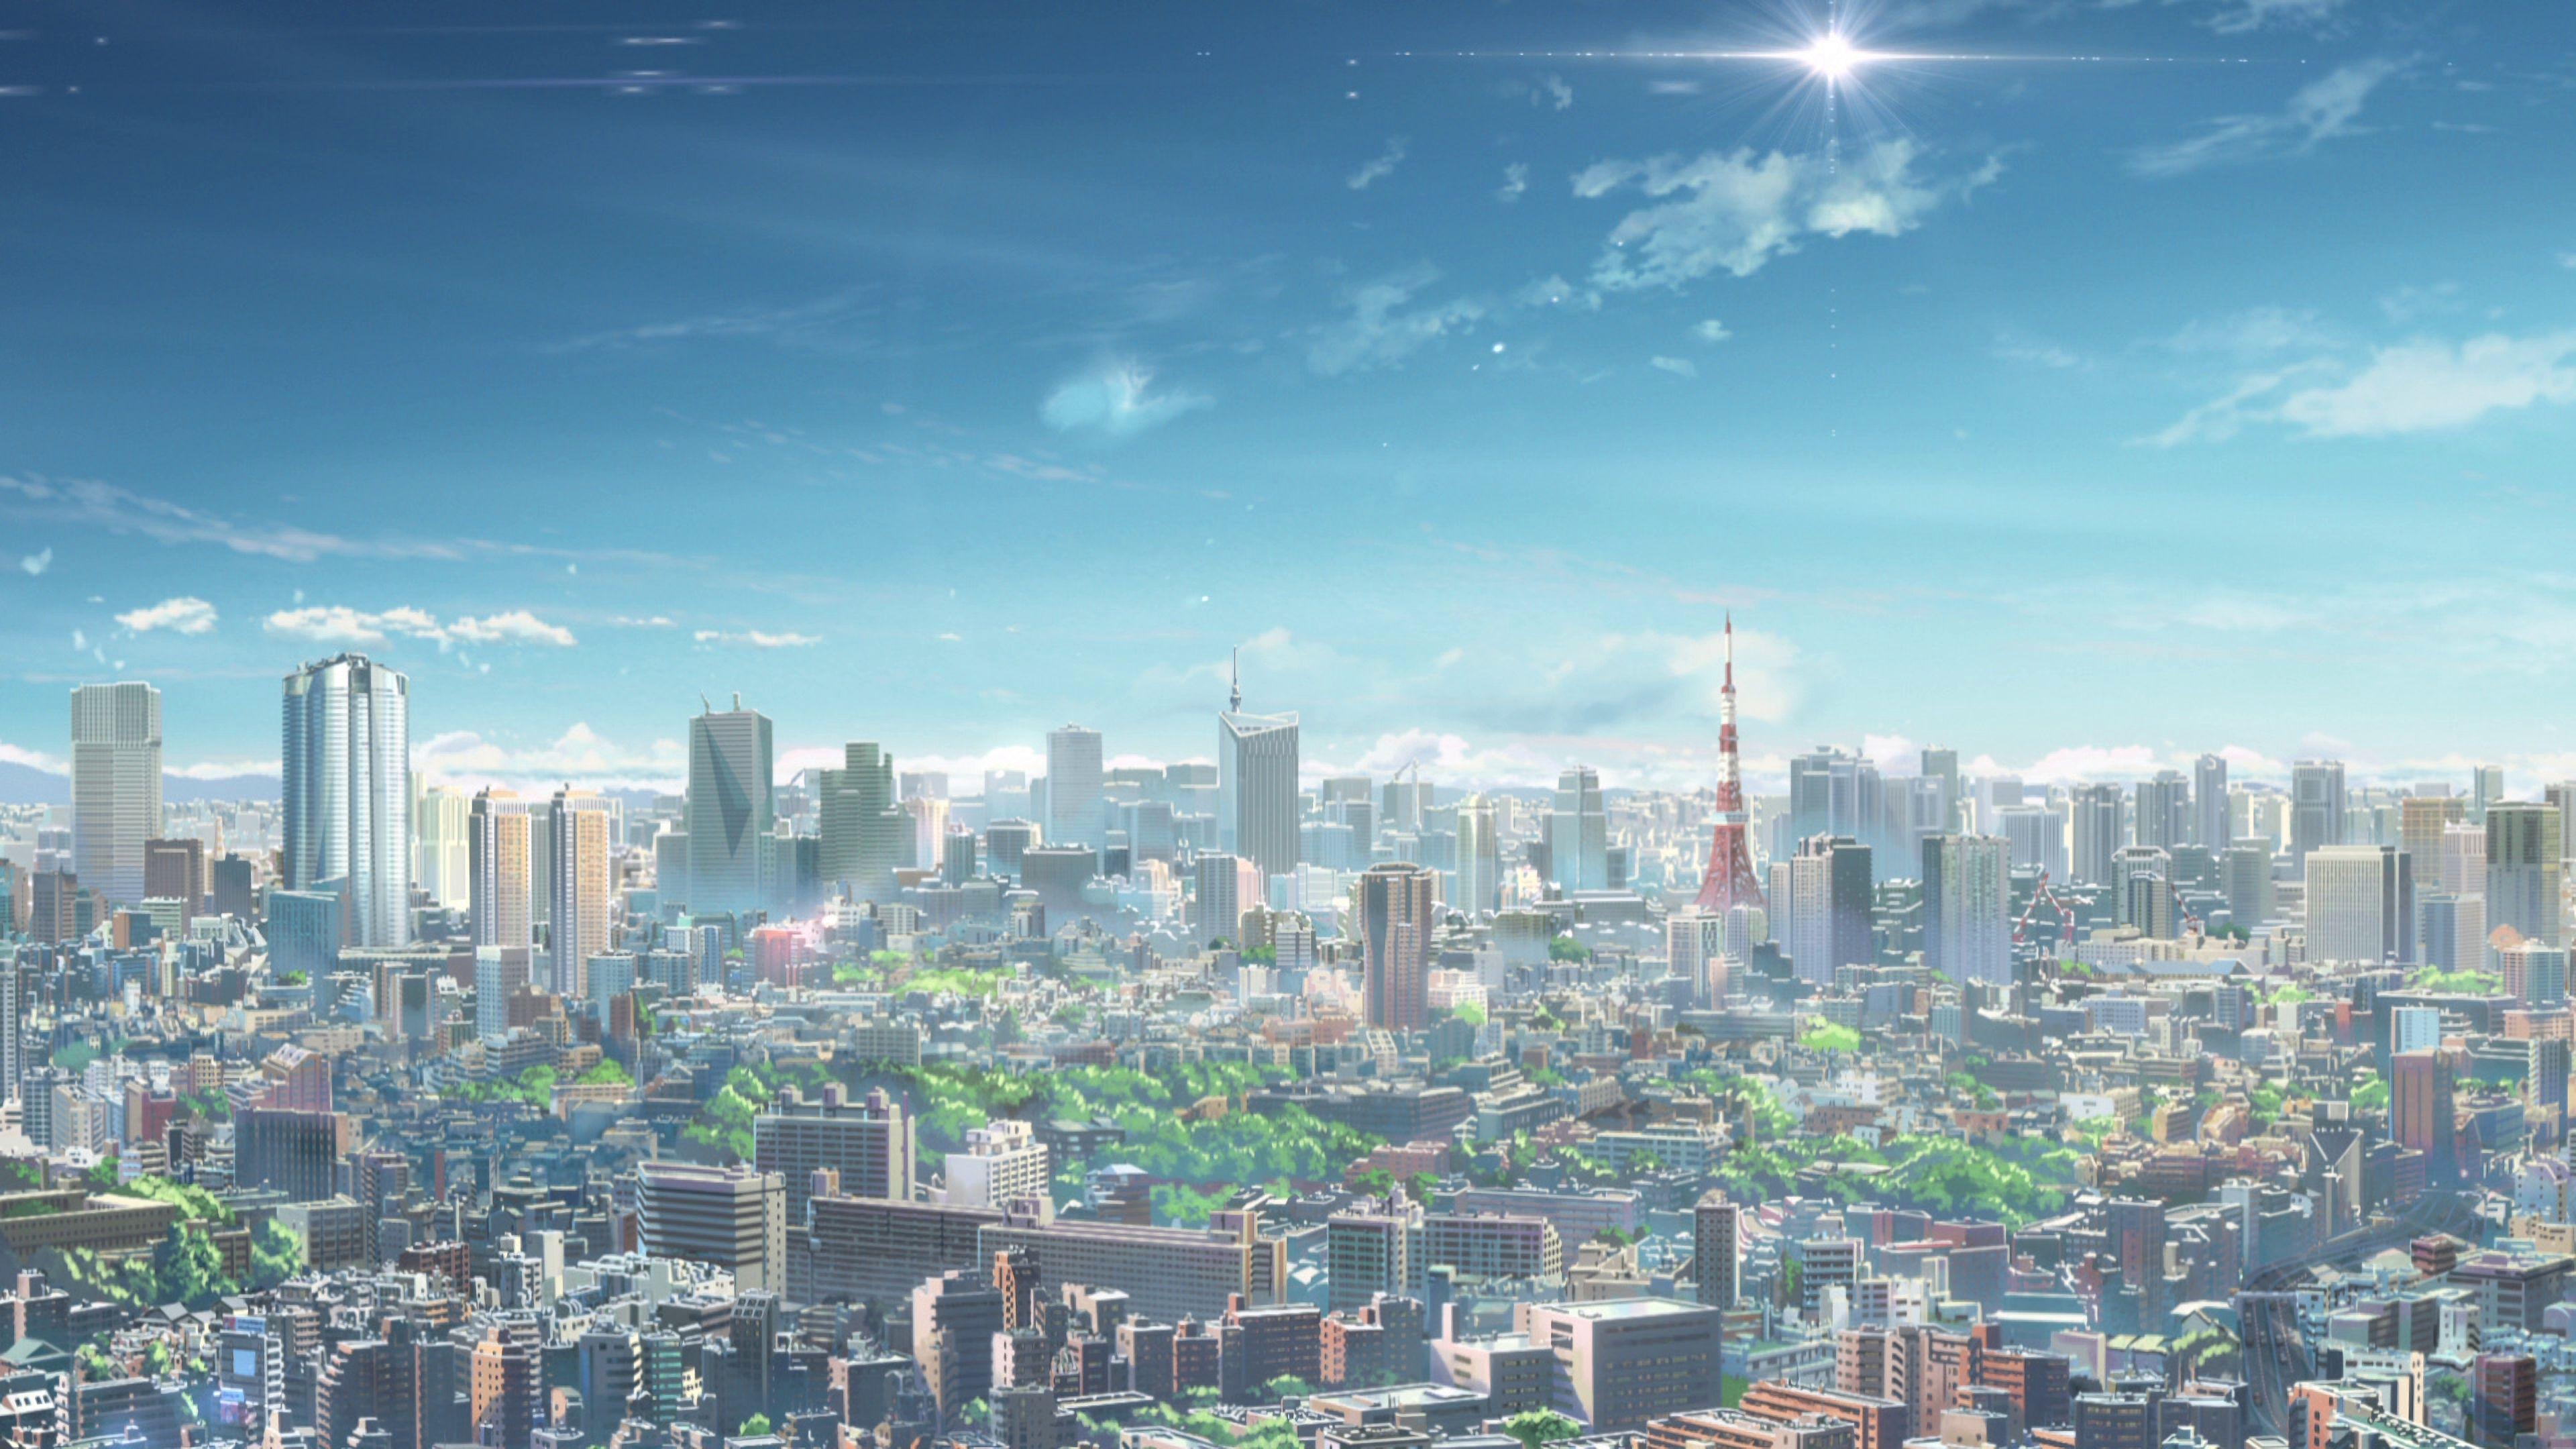 Your Name Scenery Wallpapers - Top Free Your Name Scenery Backgrounds